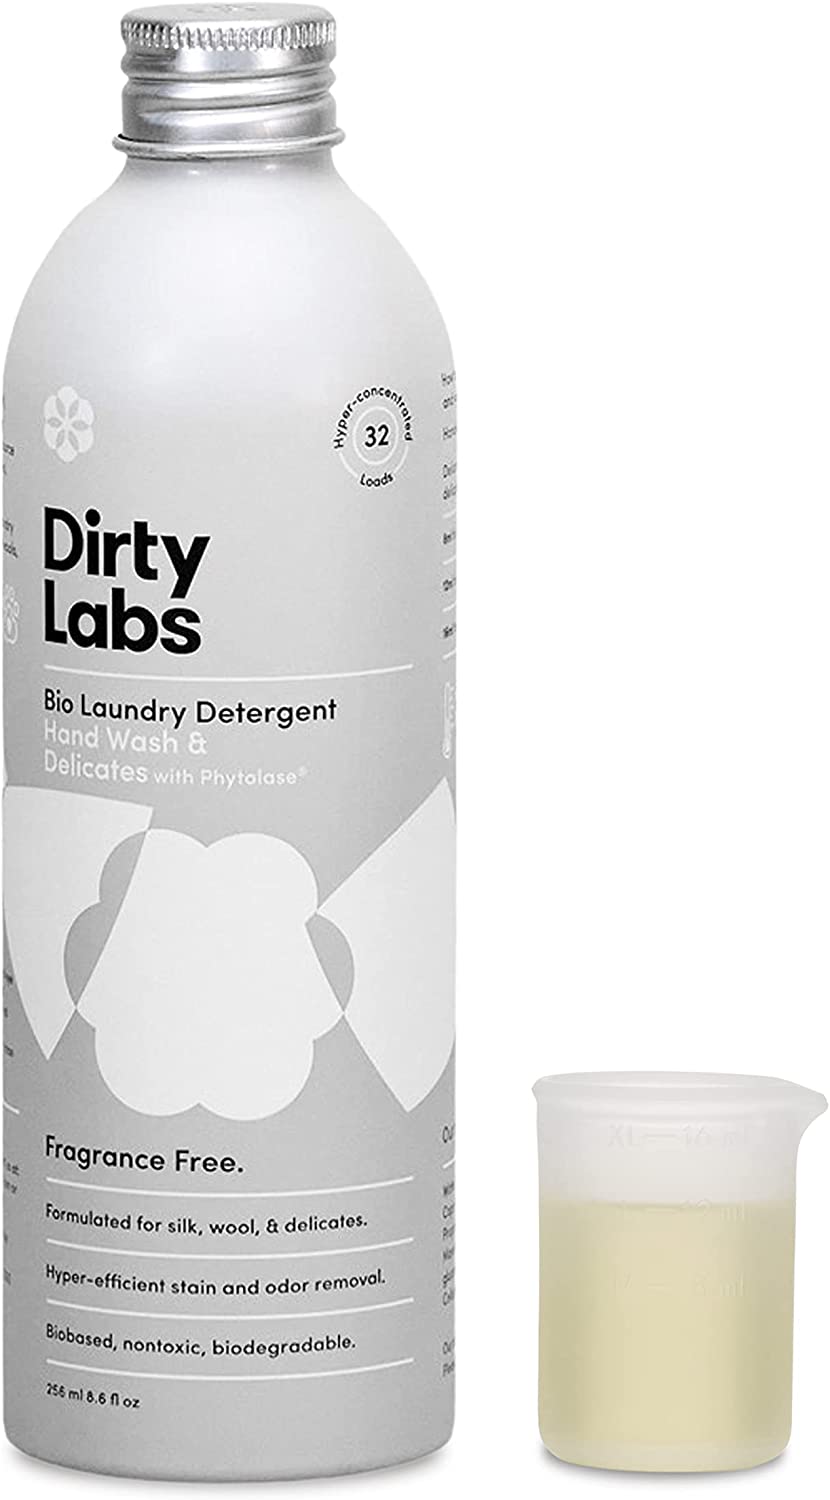 Dirty Labs Hand Wash _ Delicates Detergent